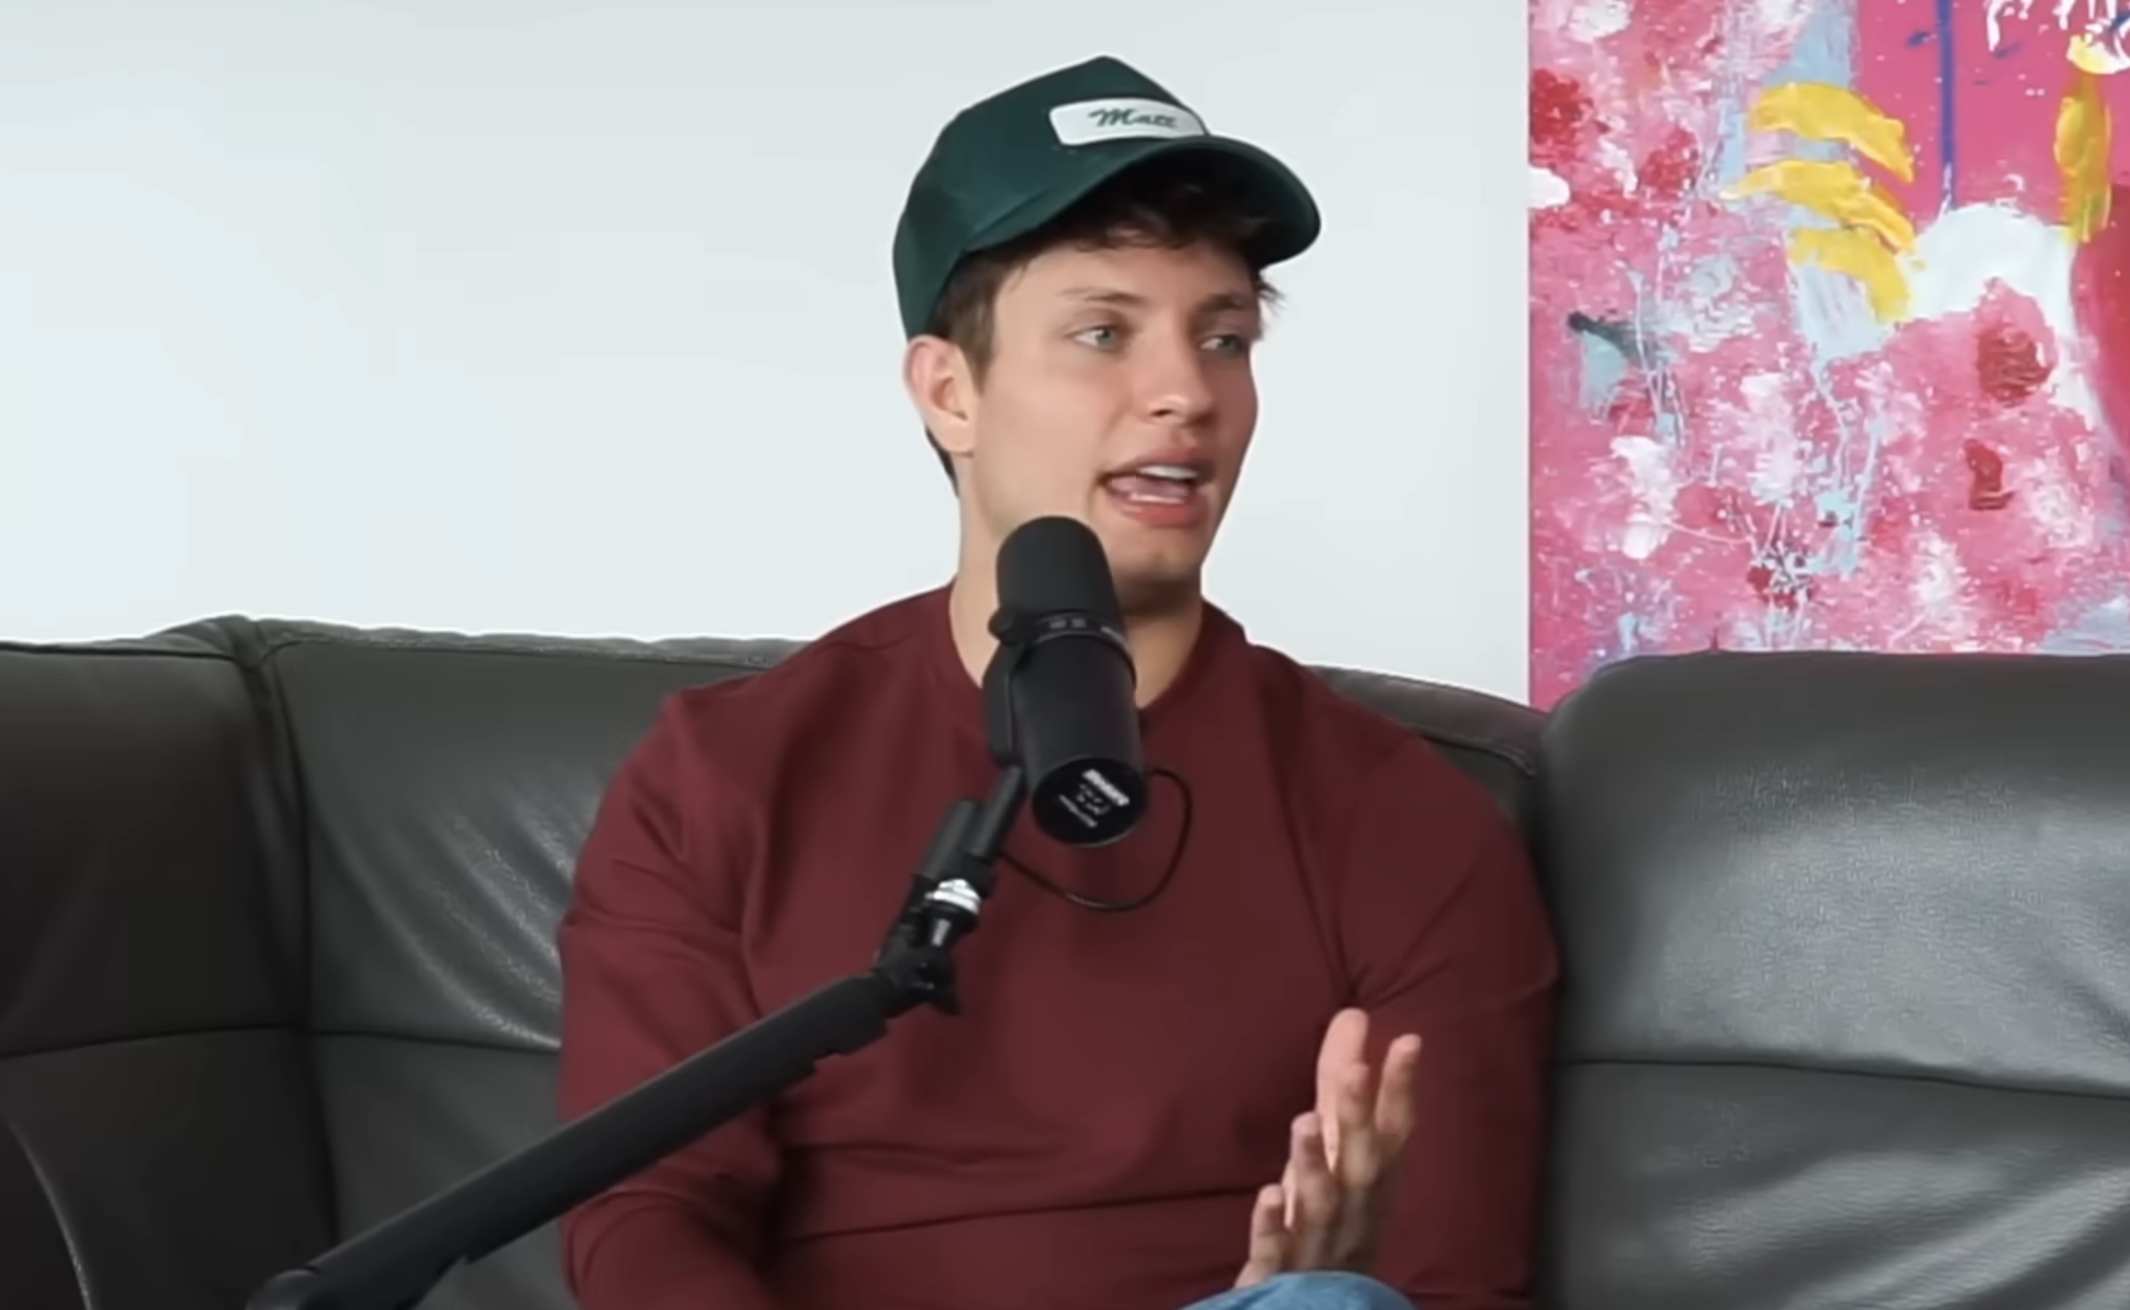 Closeup of Matt Rife sitting on a couch for the podcast interview